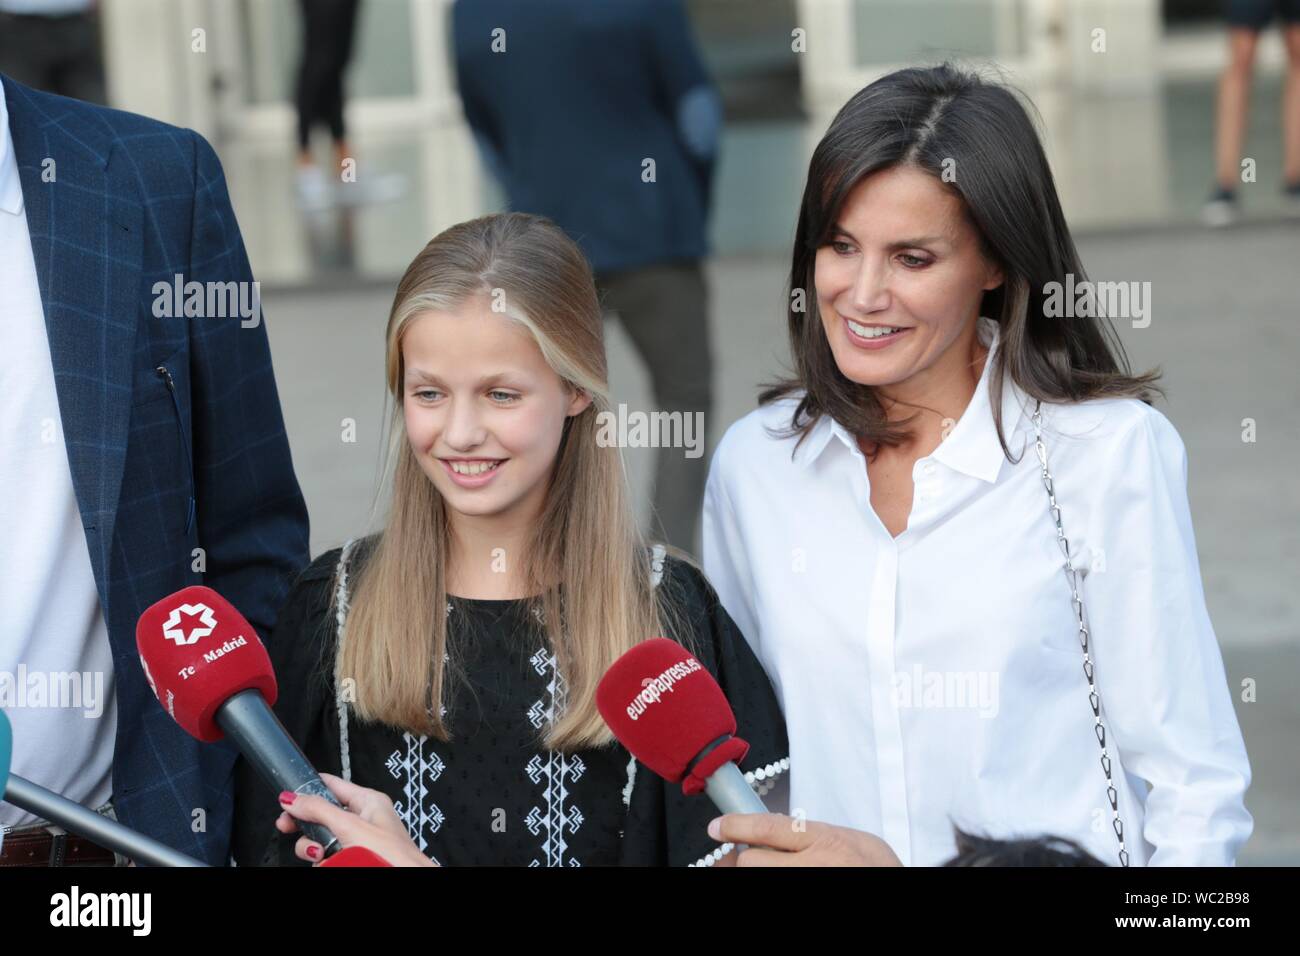 Madrid, Spain. 27th Aug, 2019. Princess Leonor.Felipe VI and Letizia Reyes de España speak with the press accompanied by their daughters Princess Leonor and the Infanta Sofia in the hospital after visiting King Juan Carlos I, who is recovering from an open heart operation. Credit: dpa picture alliance/Alamy Live News Stock Photo